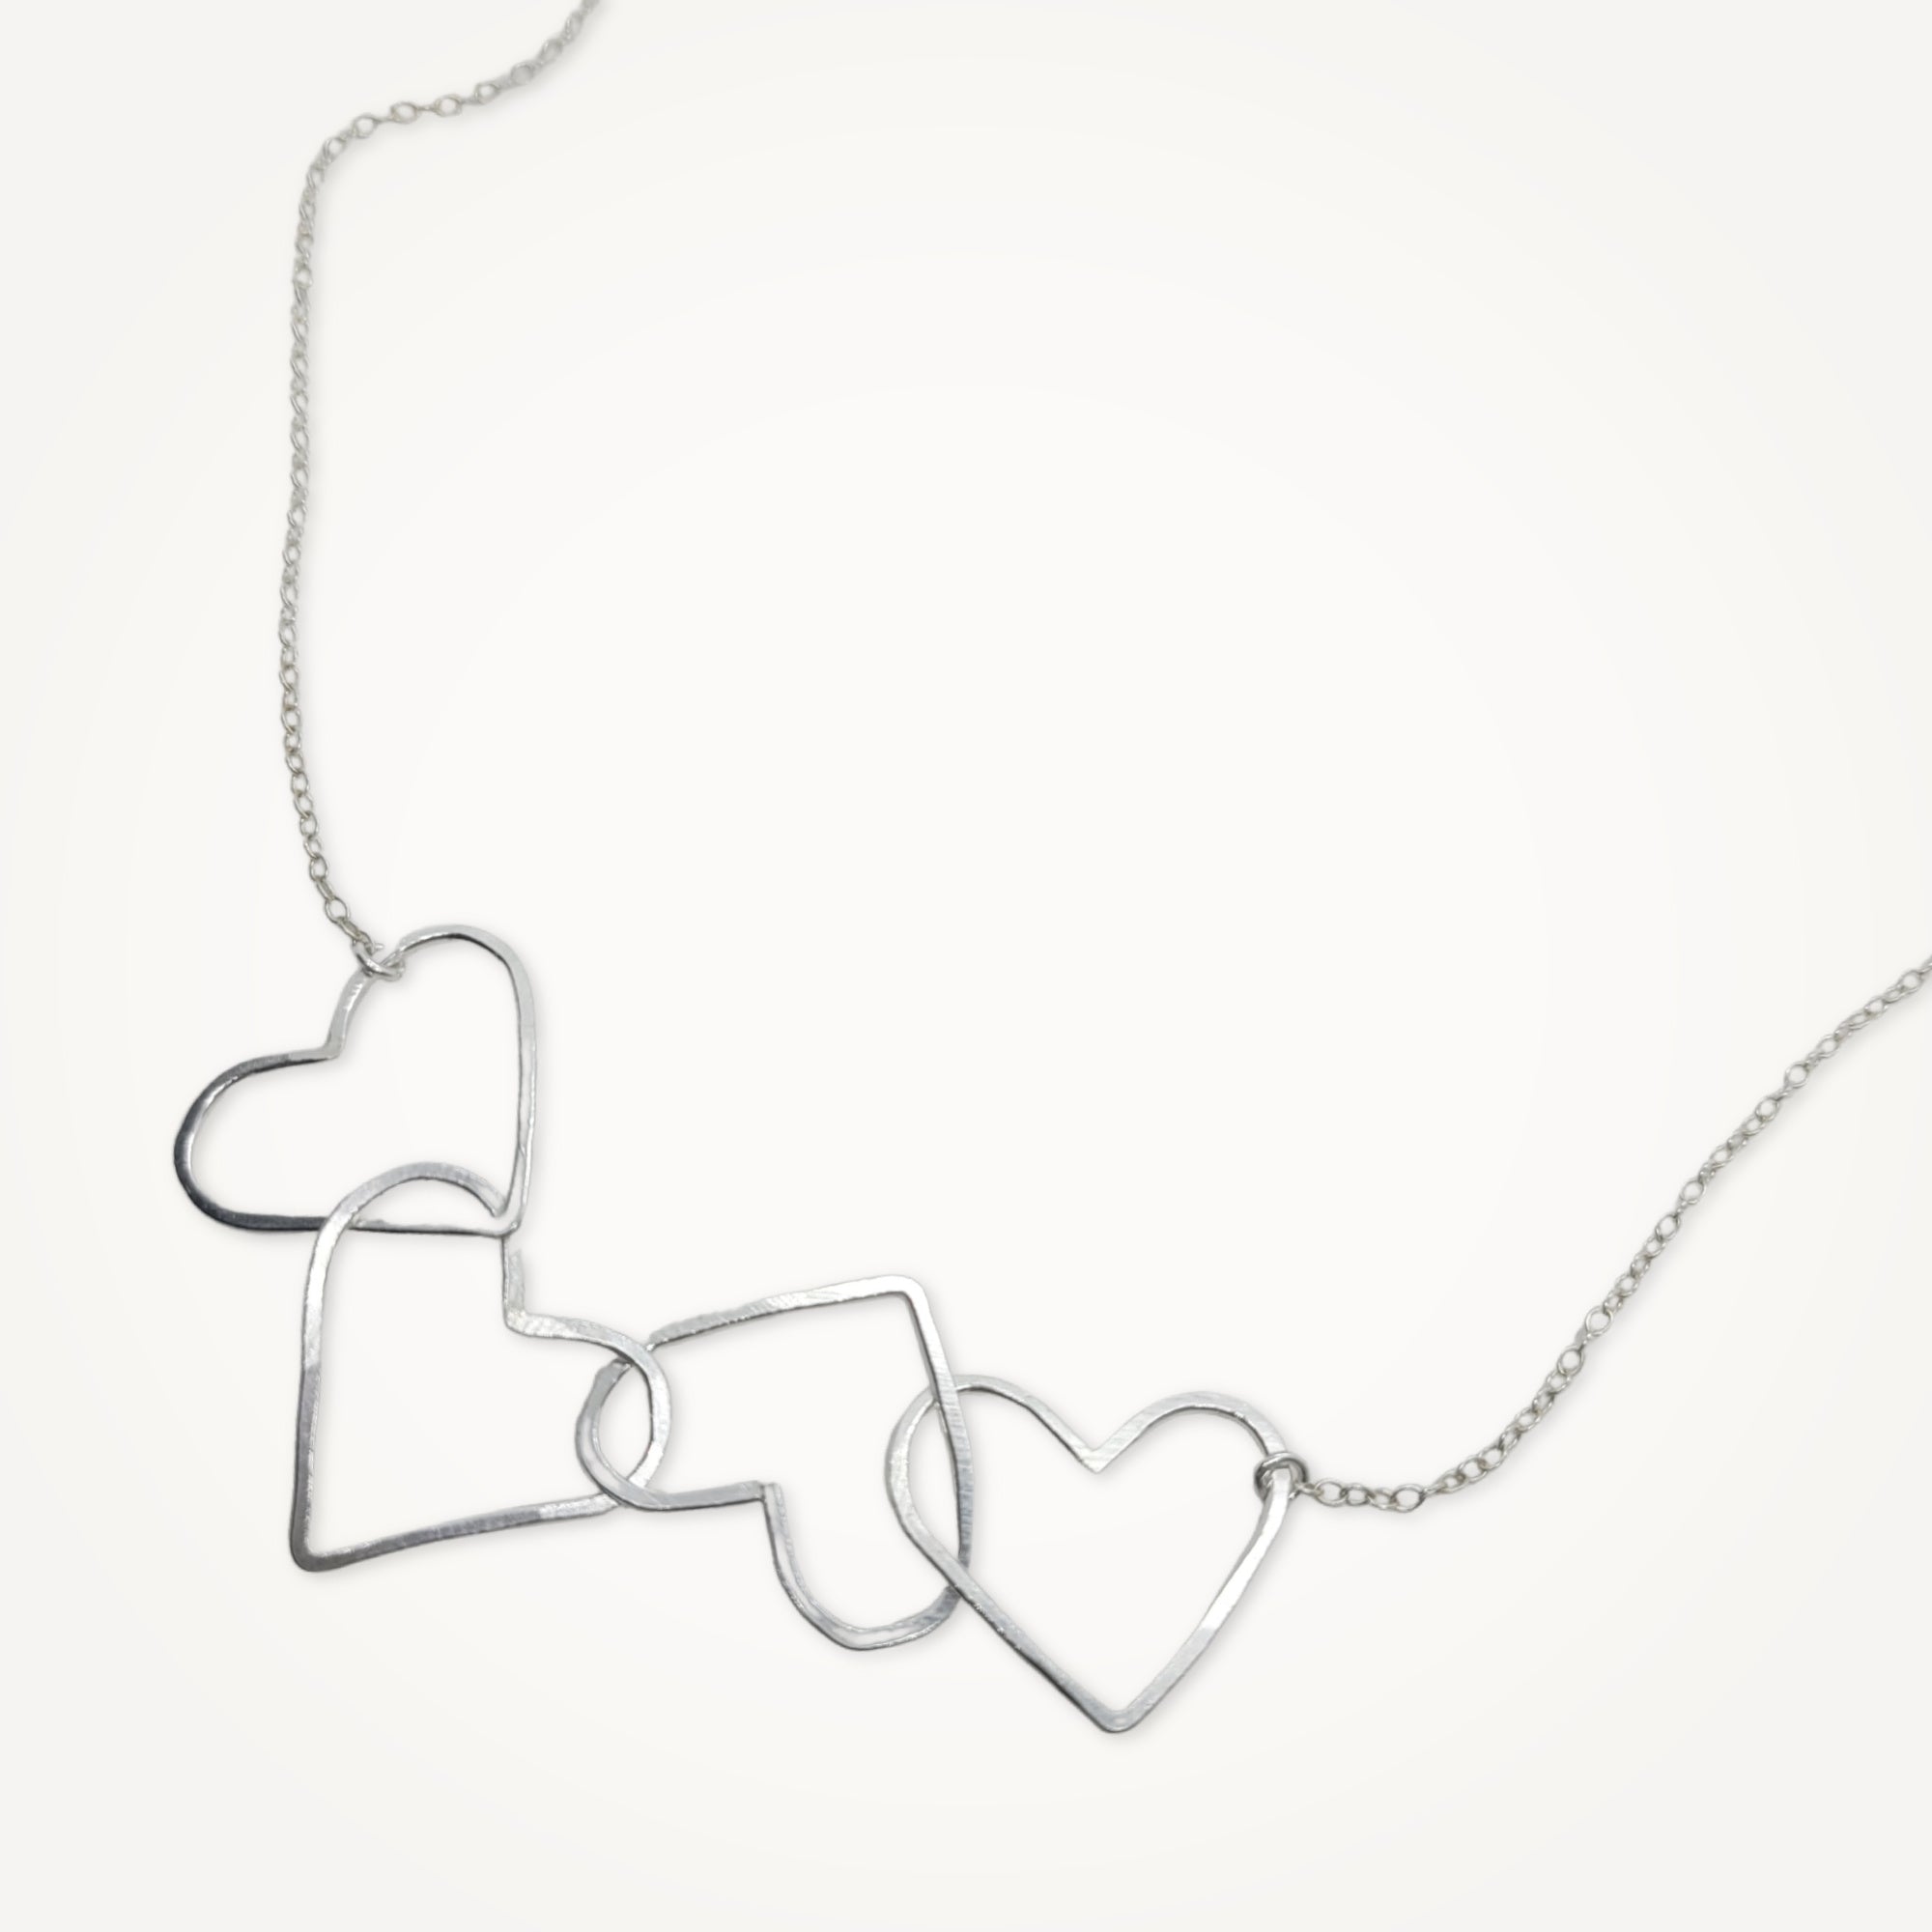 Links of Love Heart Necklace • Choice of Hearts